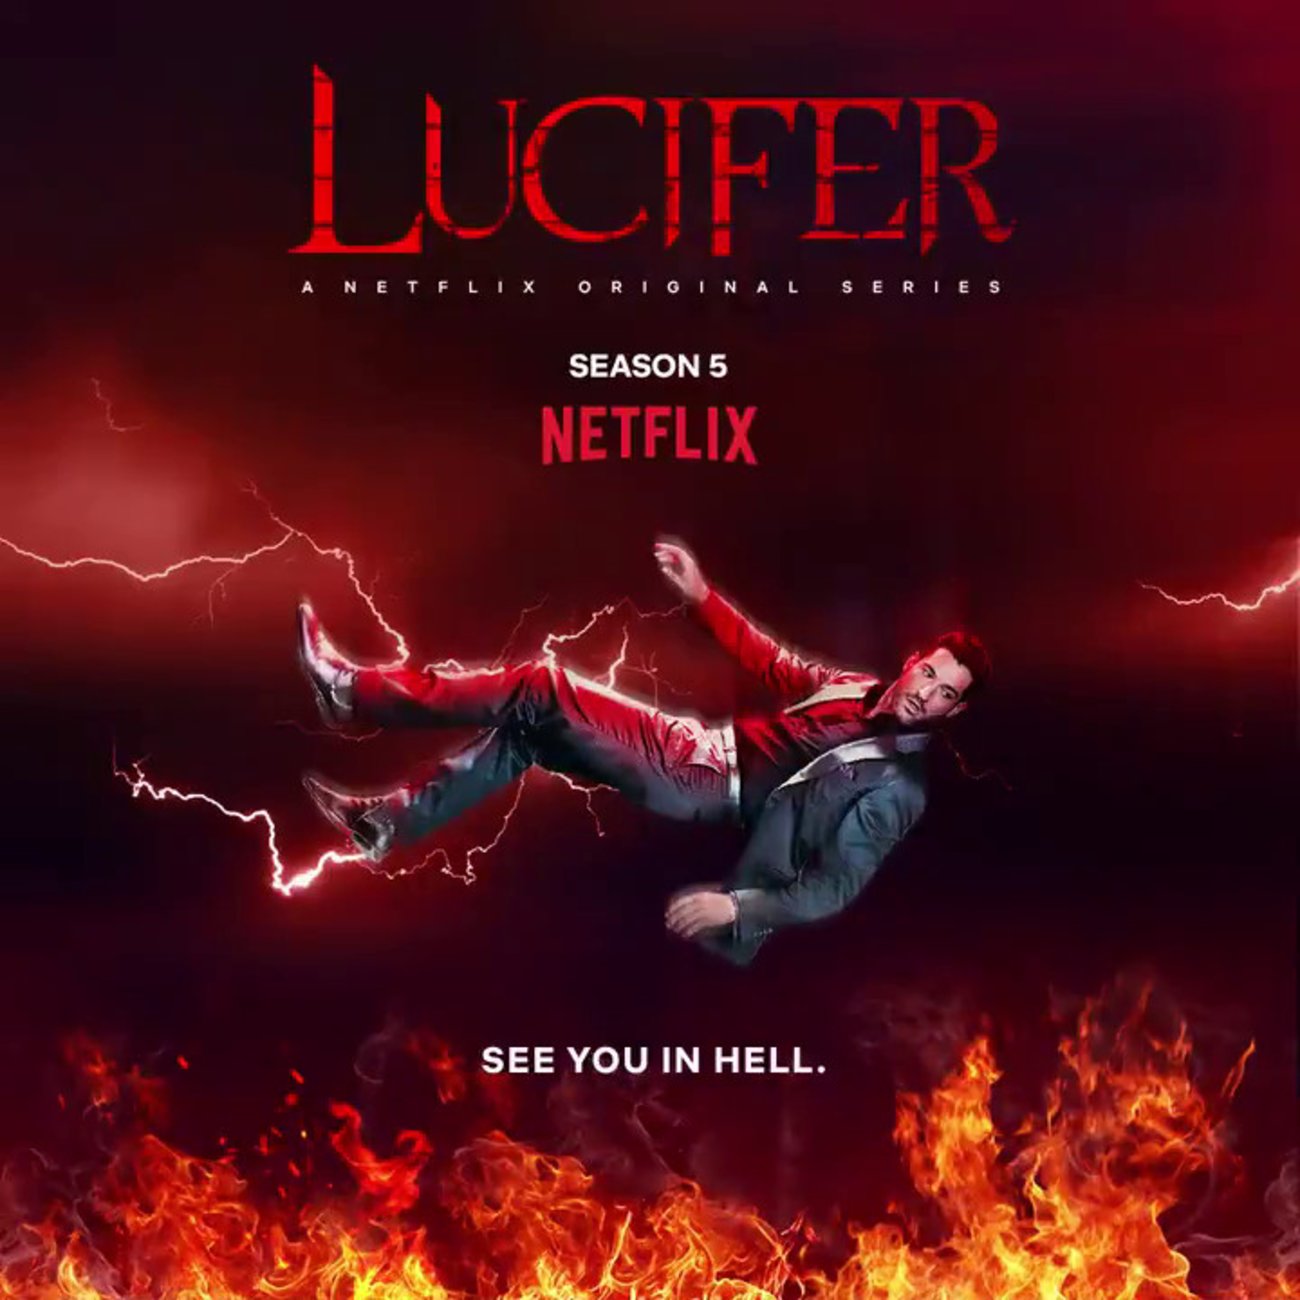 See you in Hell - Lucifer Staffel 5 kommt | Twitter